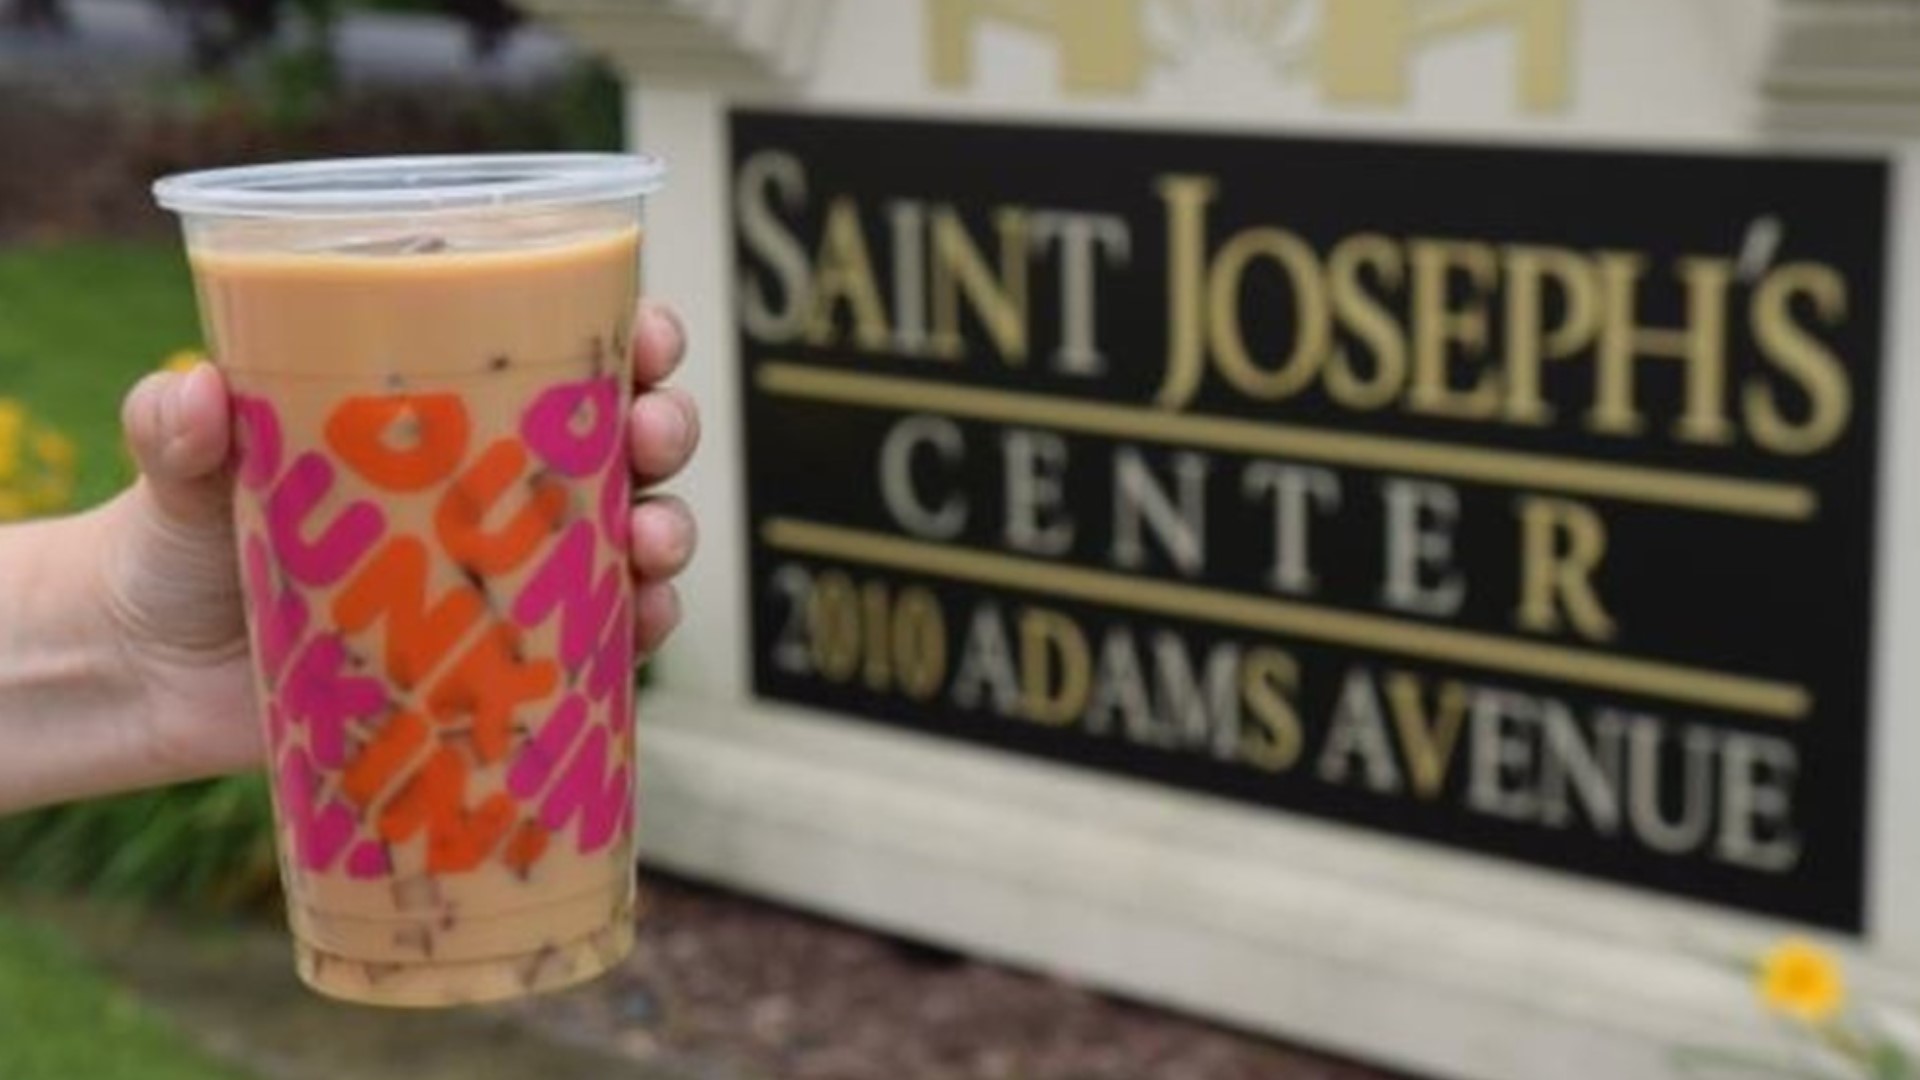 The 12th annual Iced Coffee Day fundraiser at Dunkin' for St. Joseph's Center and Go Joe 24 raised more than $33,000.